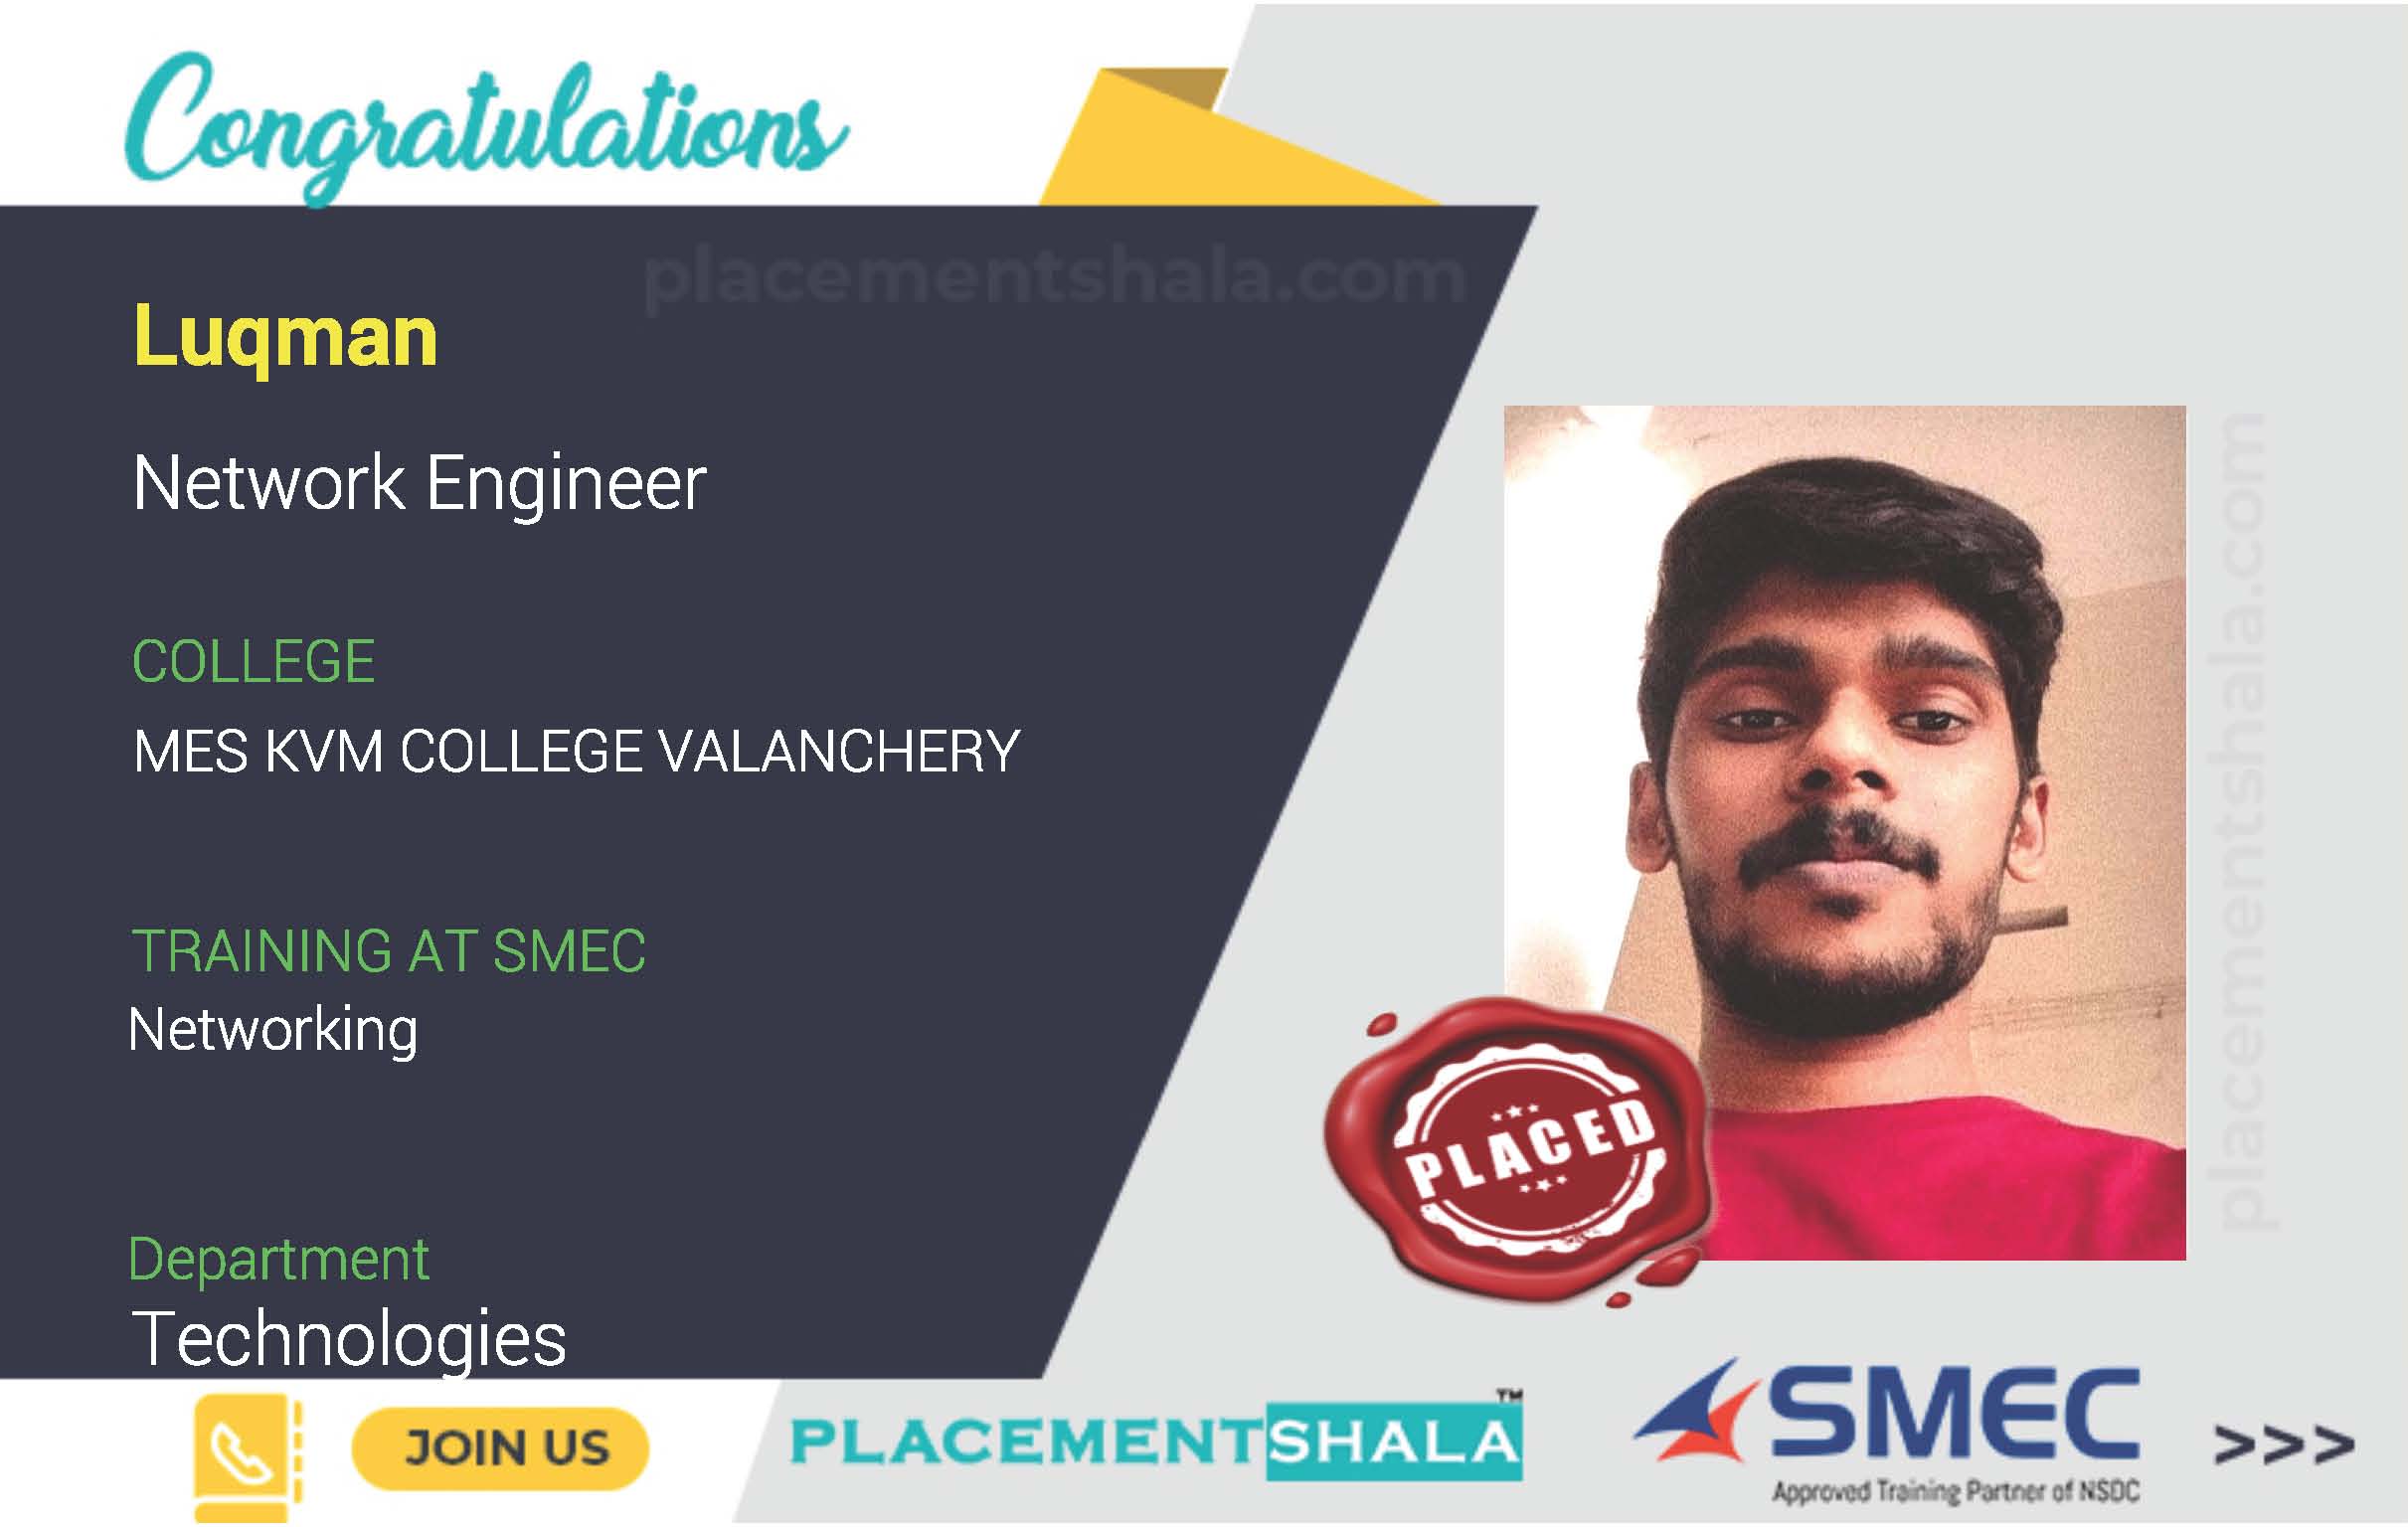 Network Engineer job placed by SMEClabs, candidate from MES KVM COLLEGE VALANCHERY completing the networking course at smeclabs